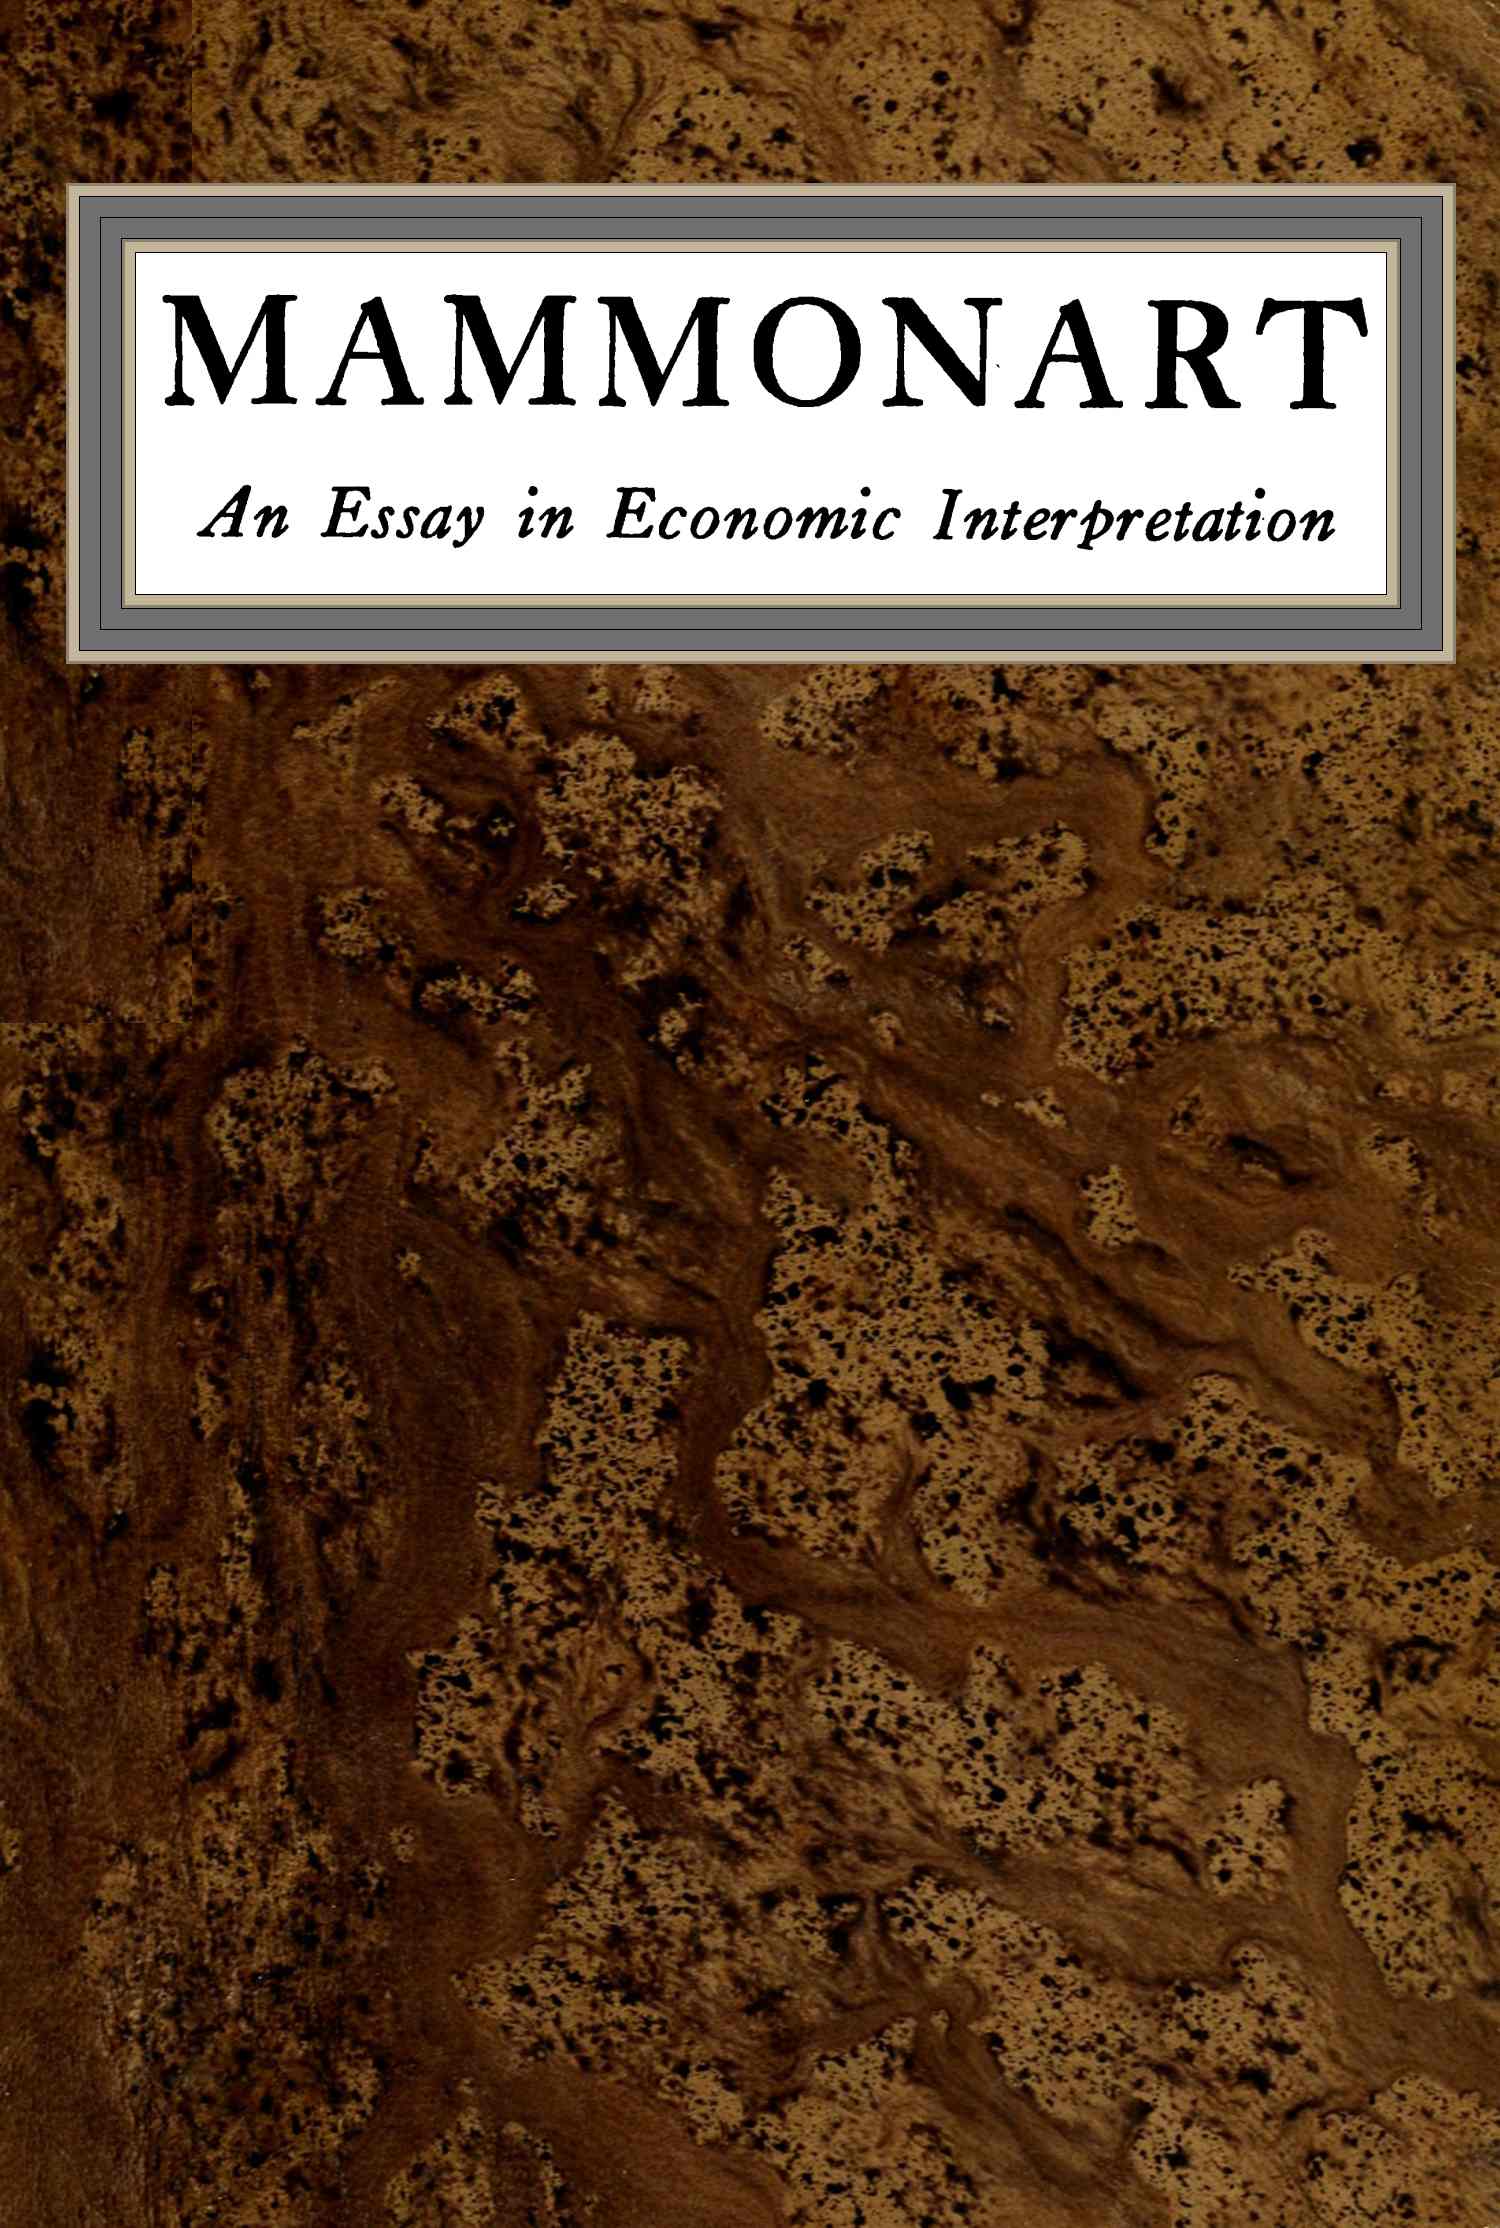 The Project Gutenberg eBook of Mammonart, by Upton Sinclair. picture